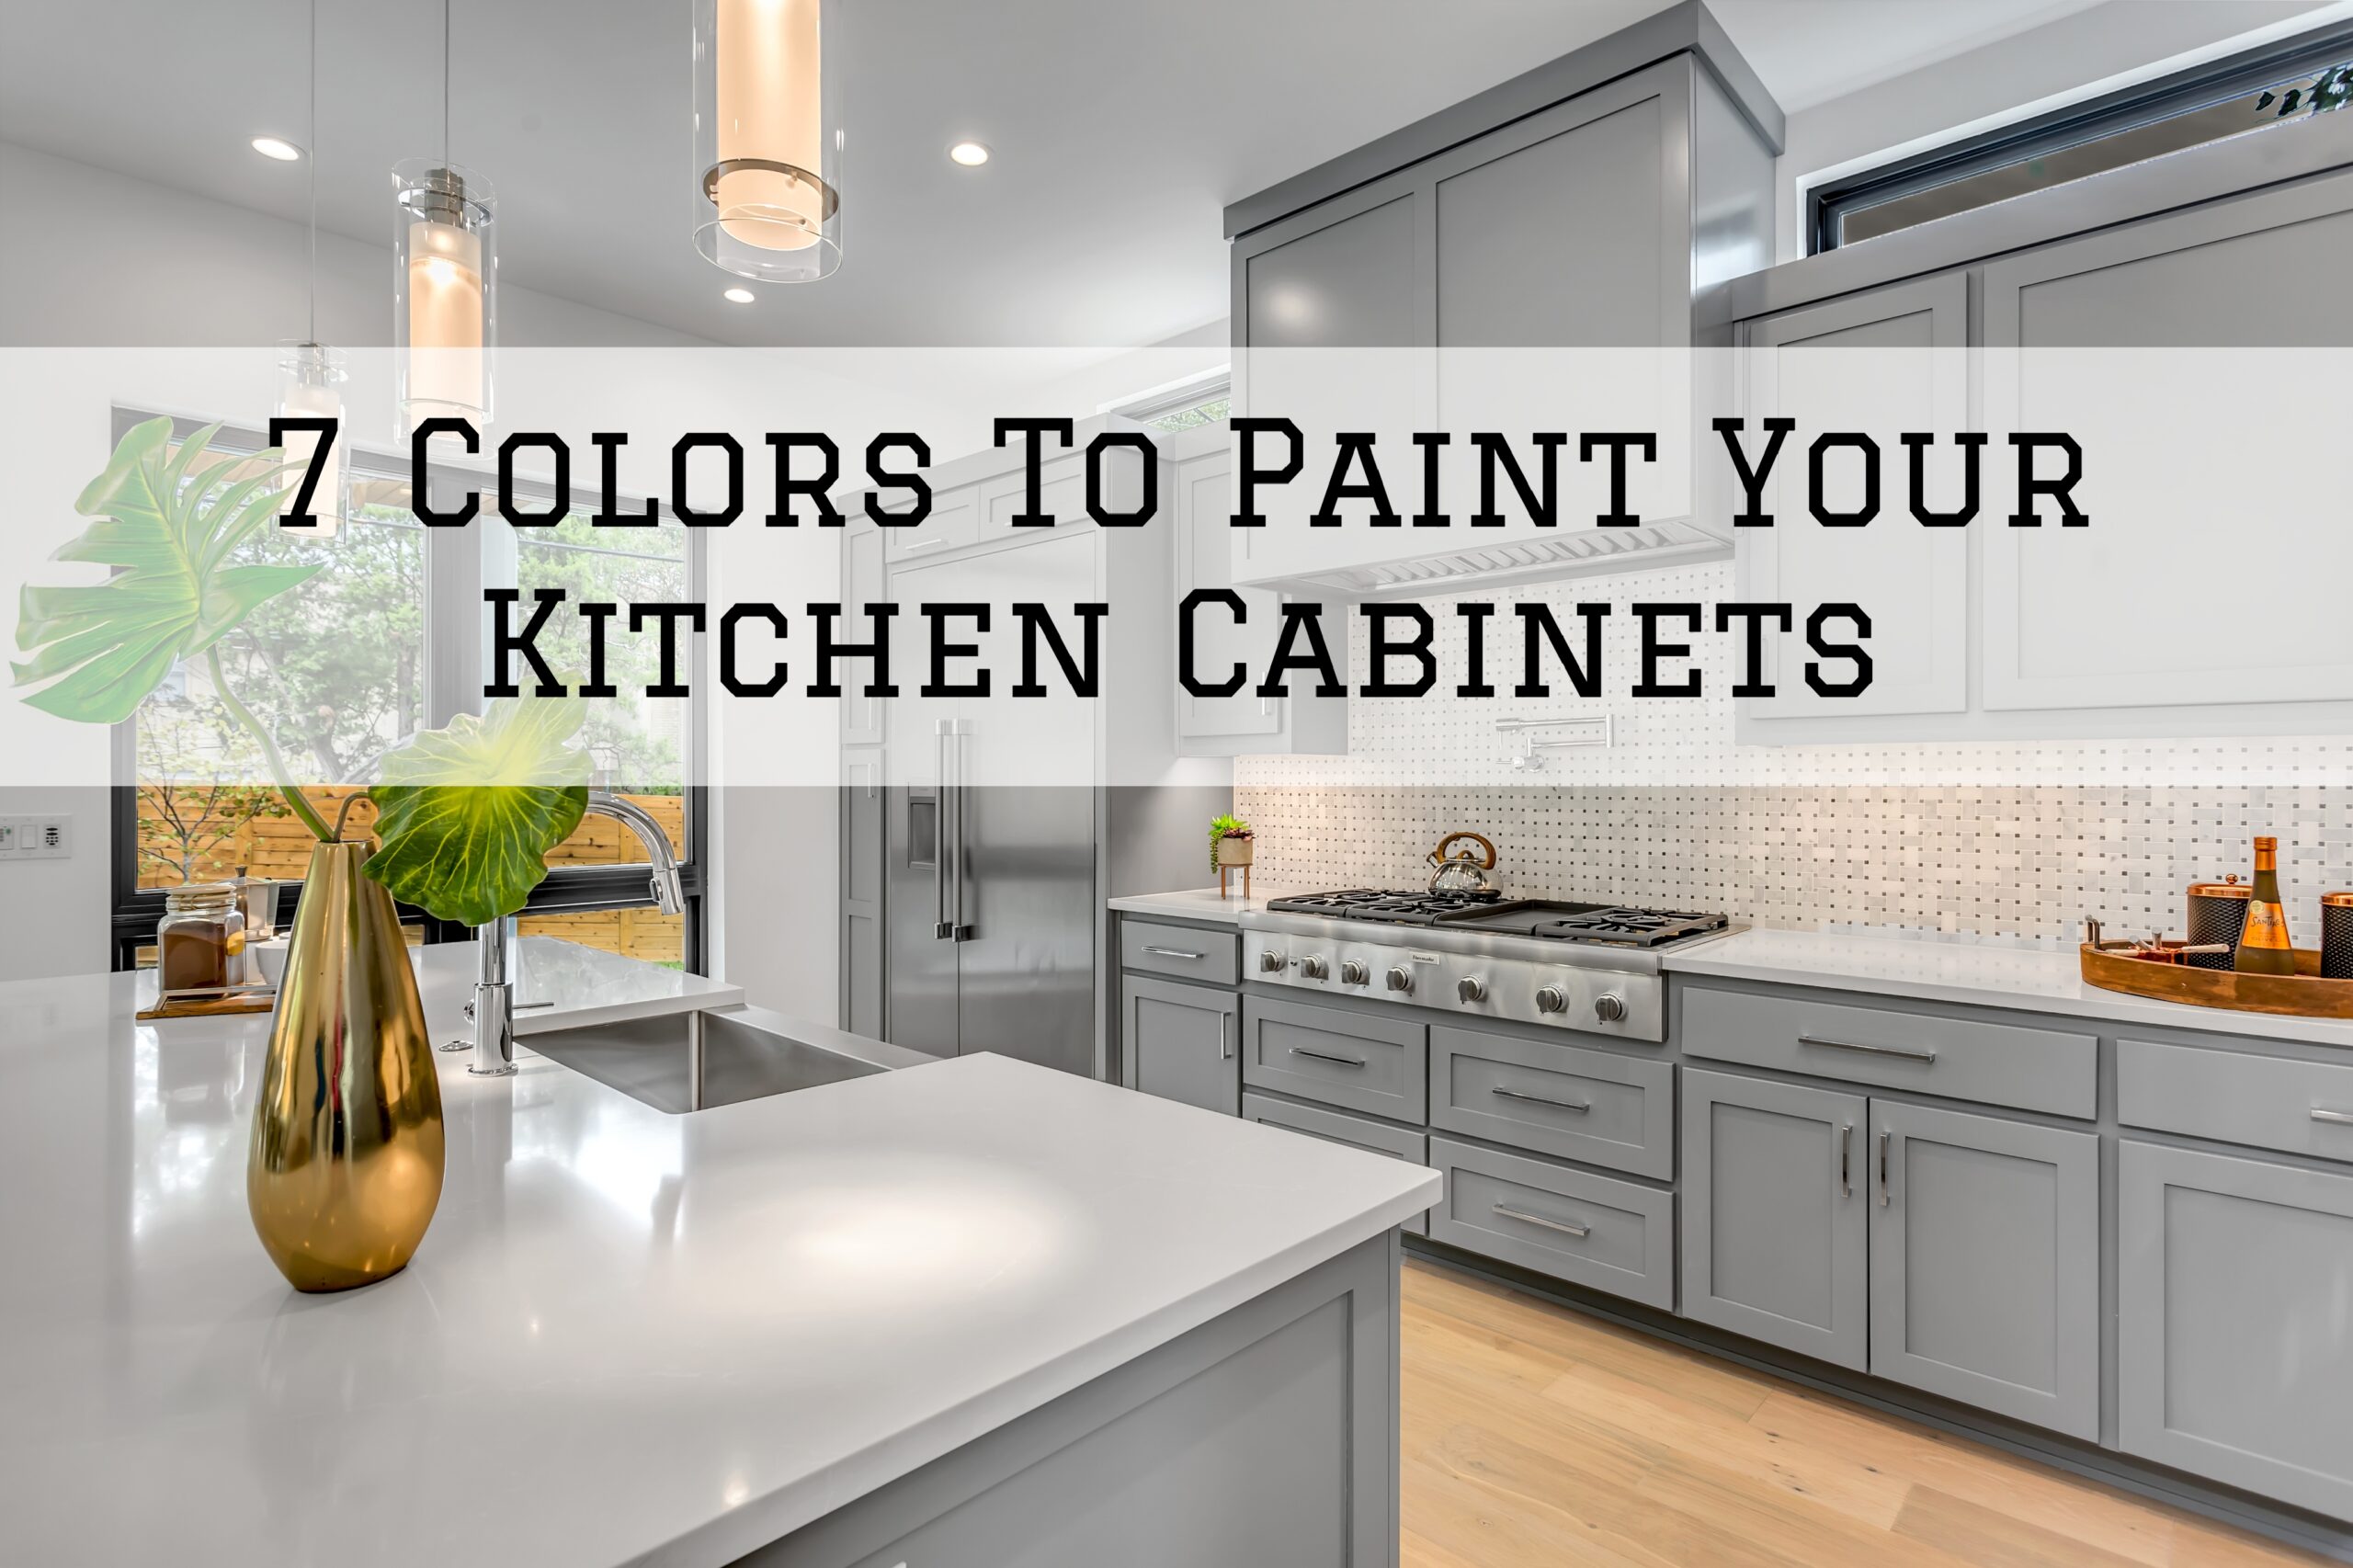 Mistakes You Make Painting Cabinets - DIY Painted Kitchen Cabinets